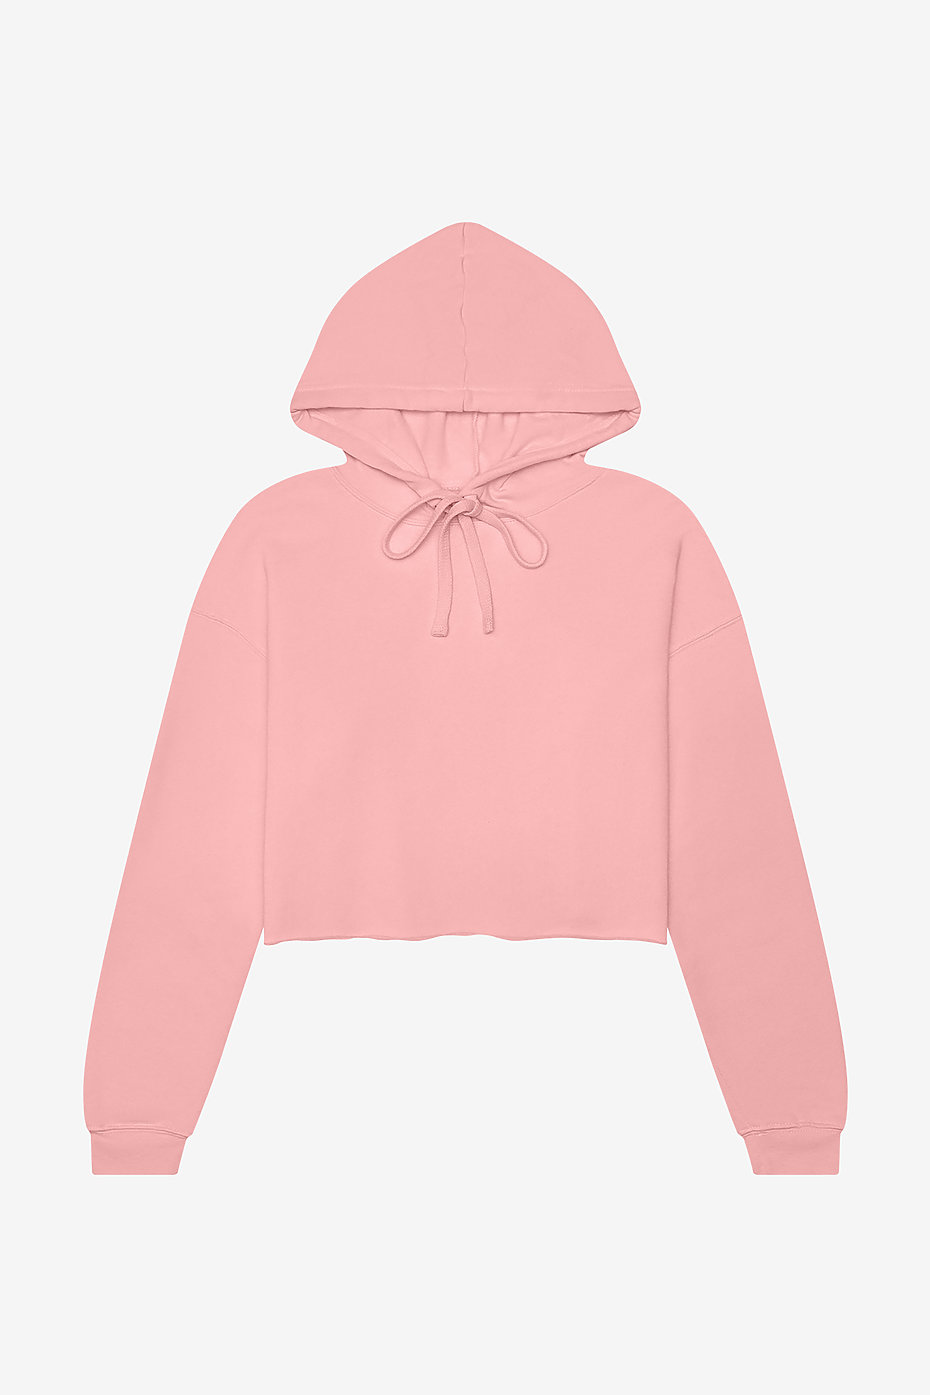 A Closer Look at Women's Cropped Hoodies: Bella+Canvas 7502 vs